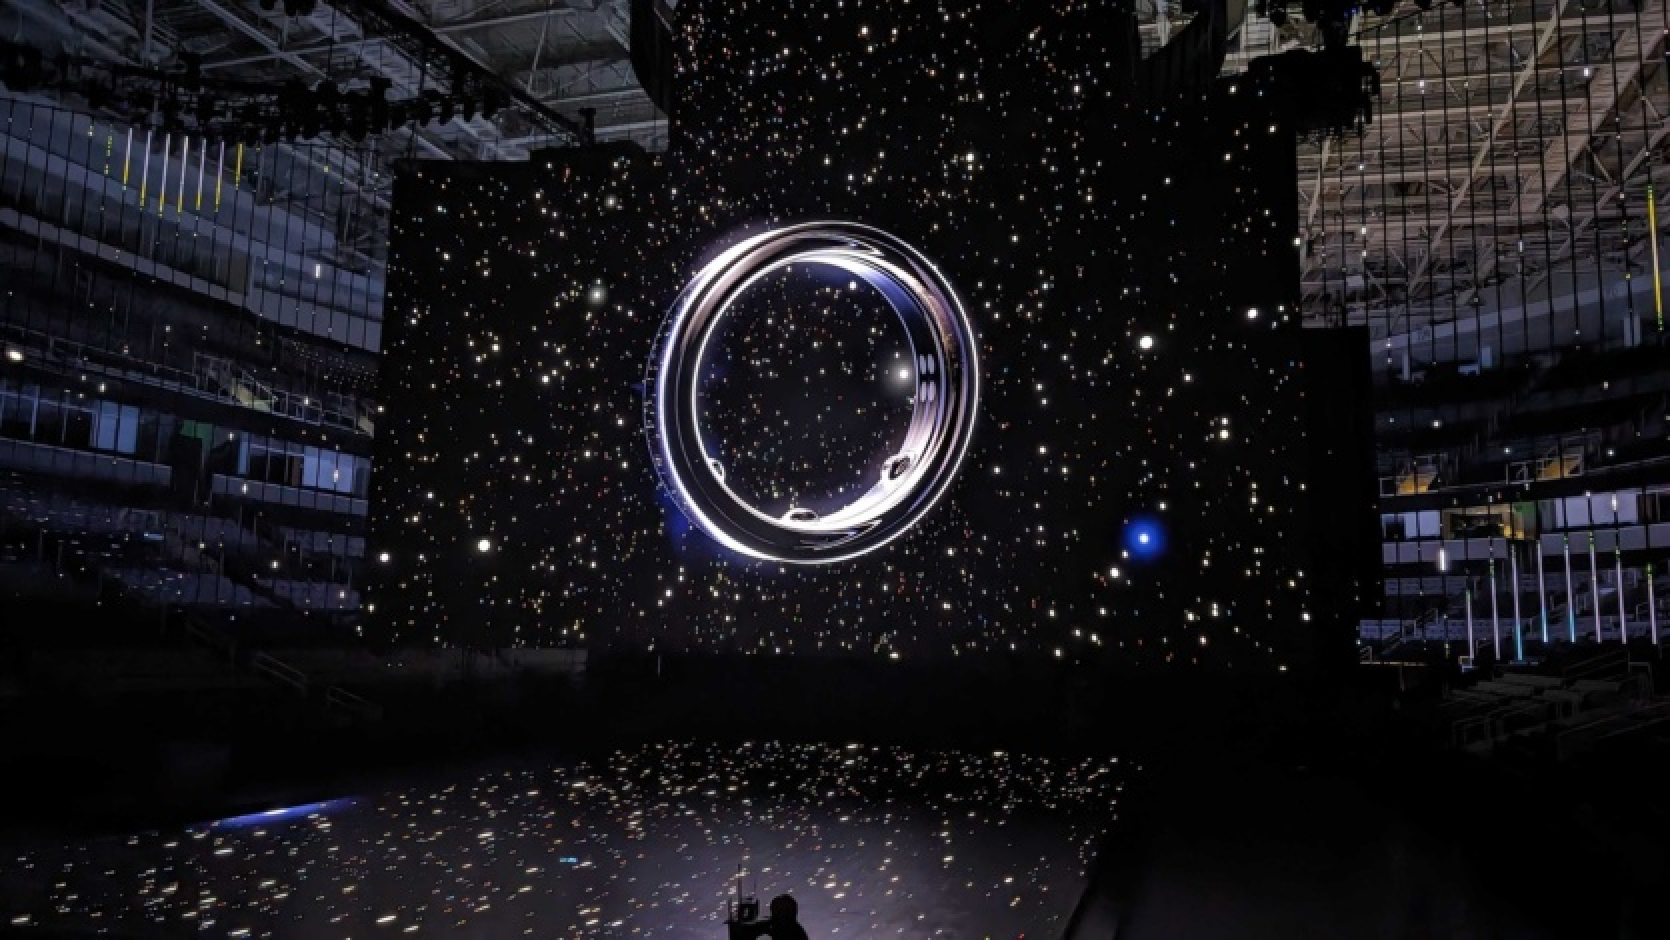 Samsung is likely to hold Galaxy Unpacked on July 10 - expect the Galaxy Flip6, Fold6 and the Galaxy Ring smart ring